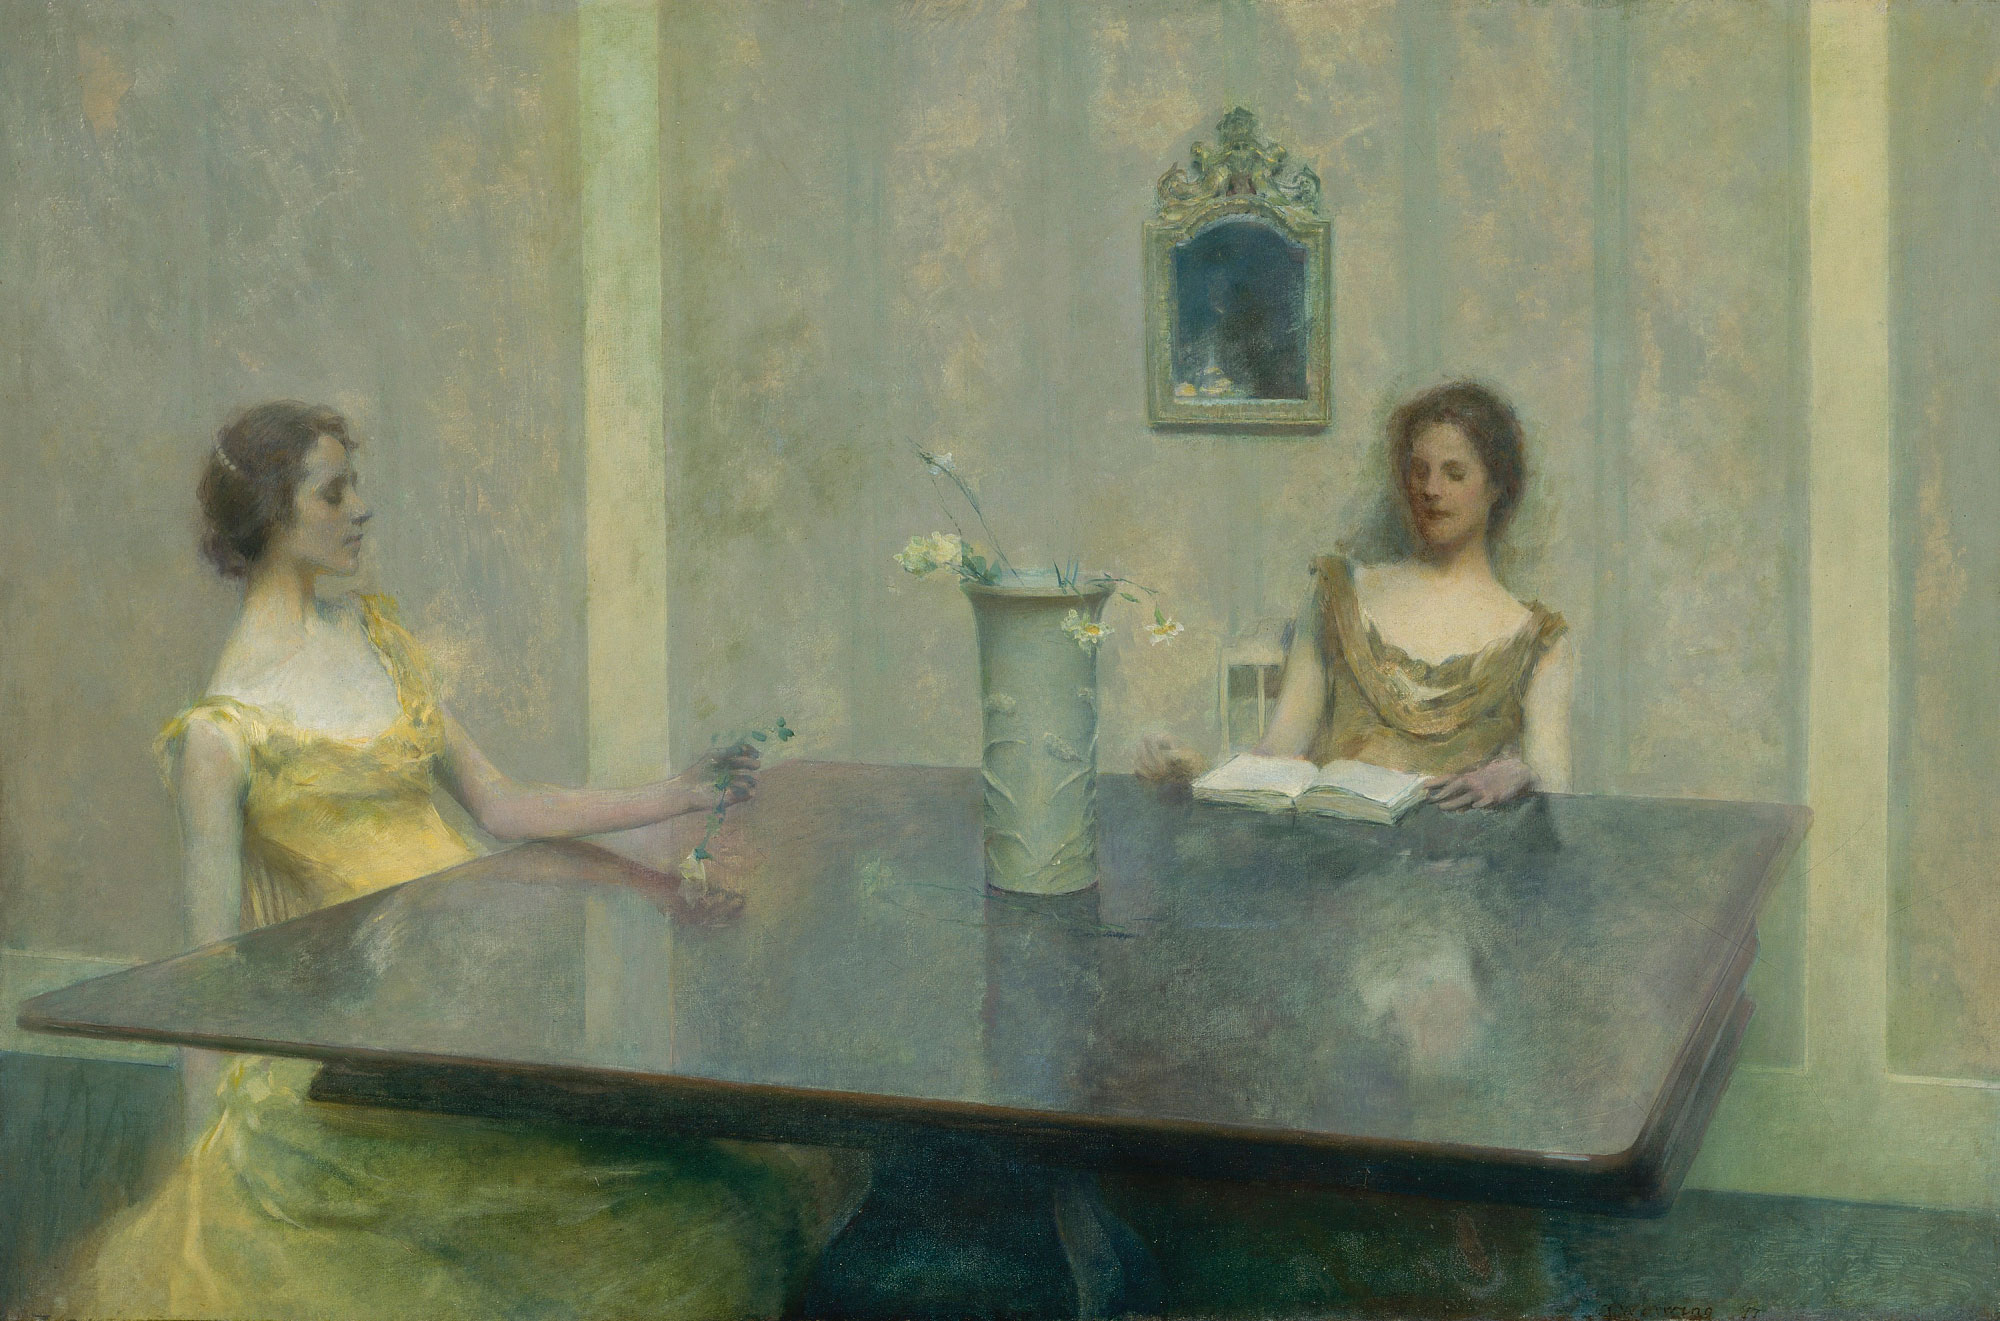 Two women wearing formal dresses sit at a large table, one reads a book. There is a vase of flowers at the center of the table.